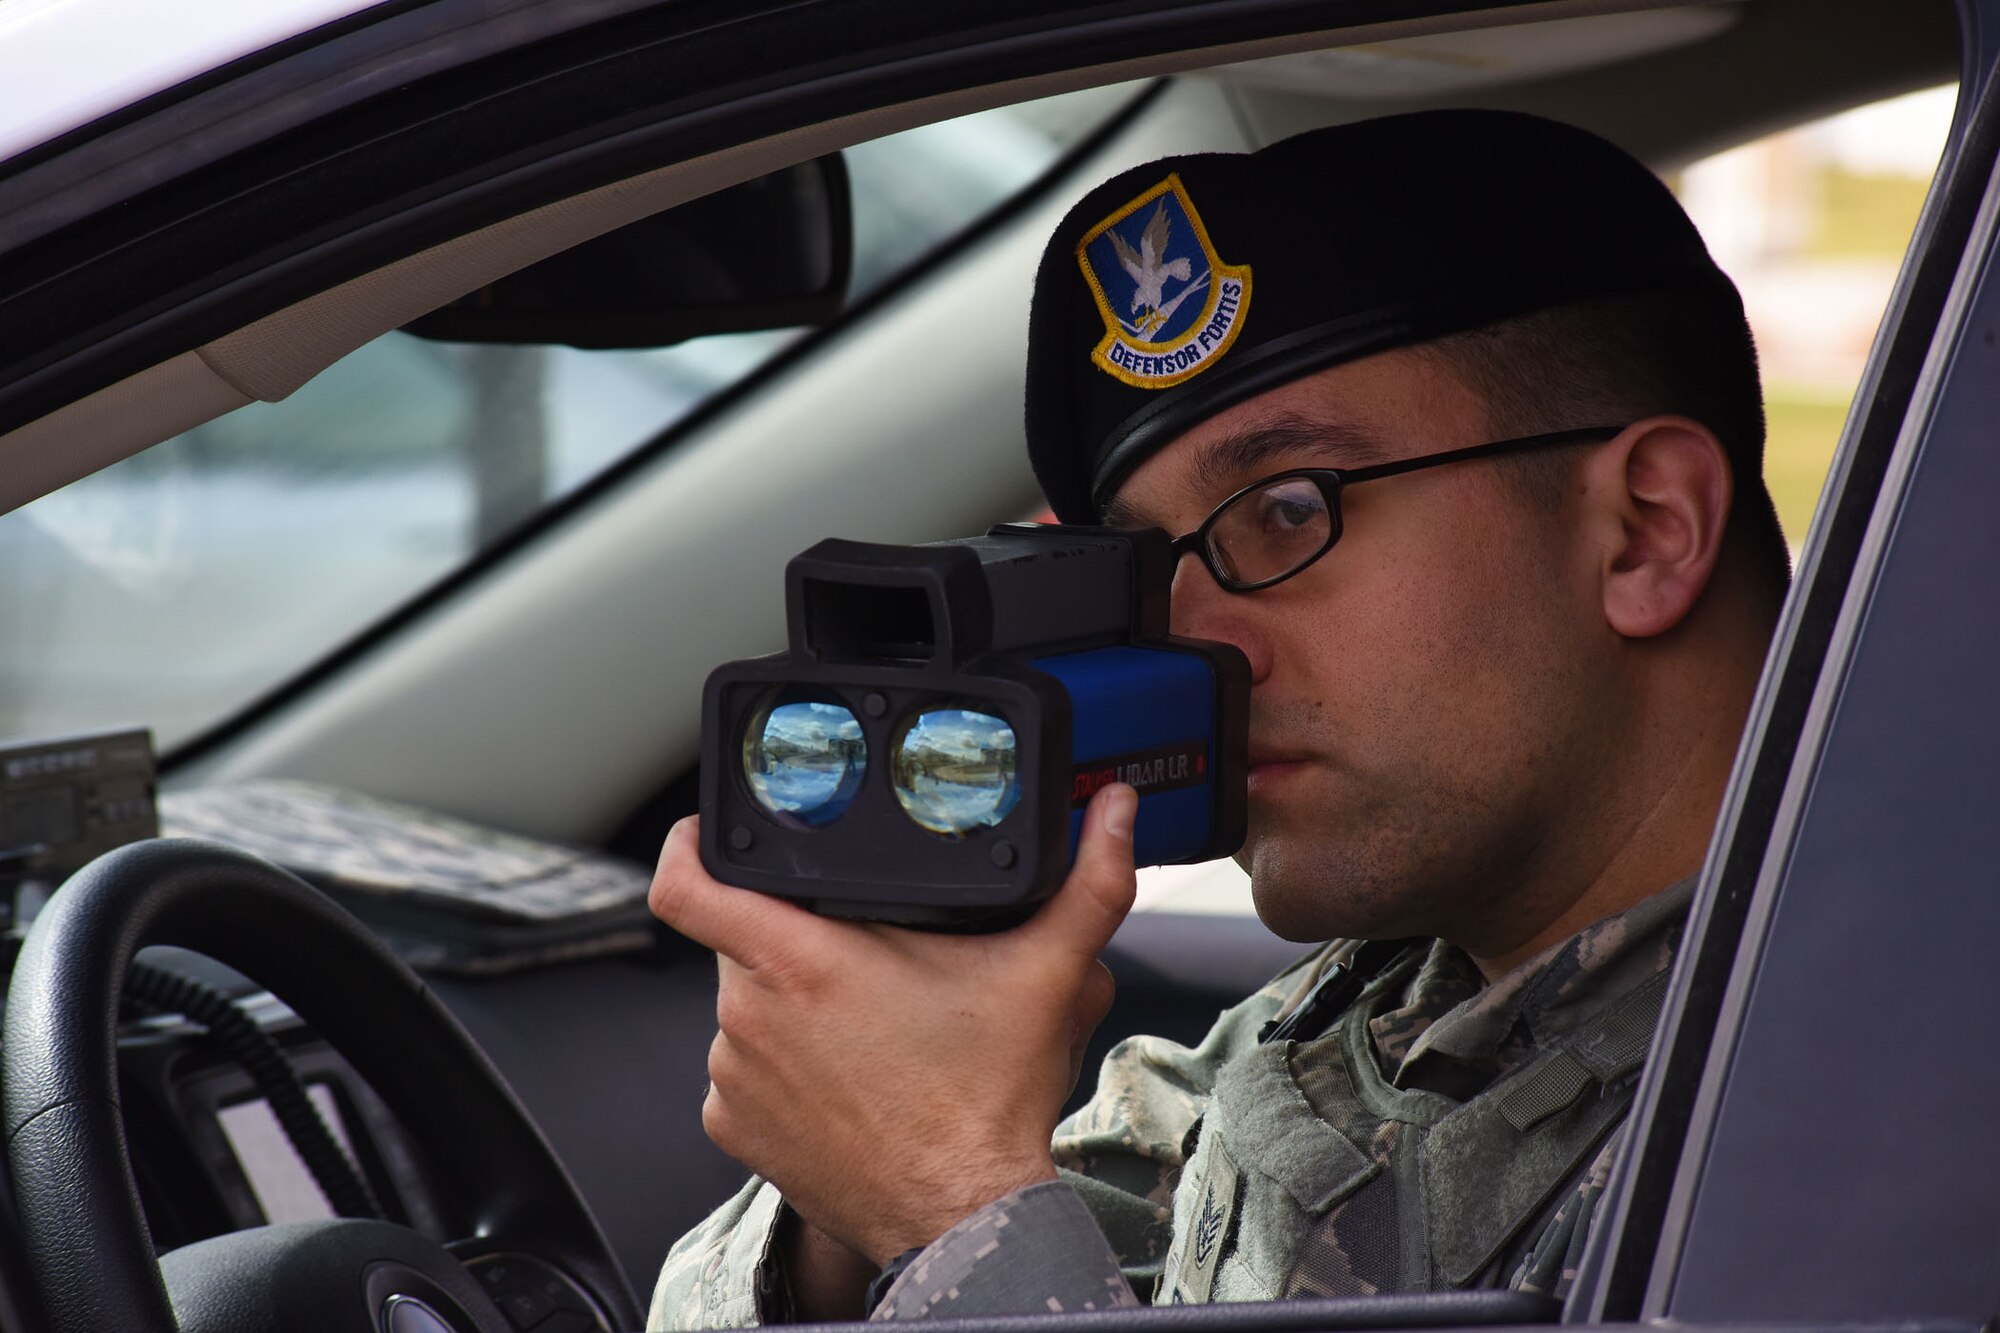 Staff Sgt. Donald Gresham, 341st Security Forces Squadron base defense operations command controller, uses a Laser Illuminated Detection and Ranging gun to check vehicles’ speed while on patrol April 2 at Malmstrom Air Force Base, Mont. While using the LIDAR gun in a traffic stop, Gresham can accurately determine a vehicle’s speed by shining the laser of the LIDAR system on the license plate of the vehicle. (U.S. Air Force photo/Airman 1st Class Collin Schmidt) 